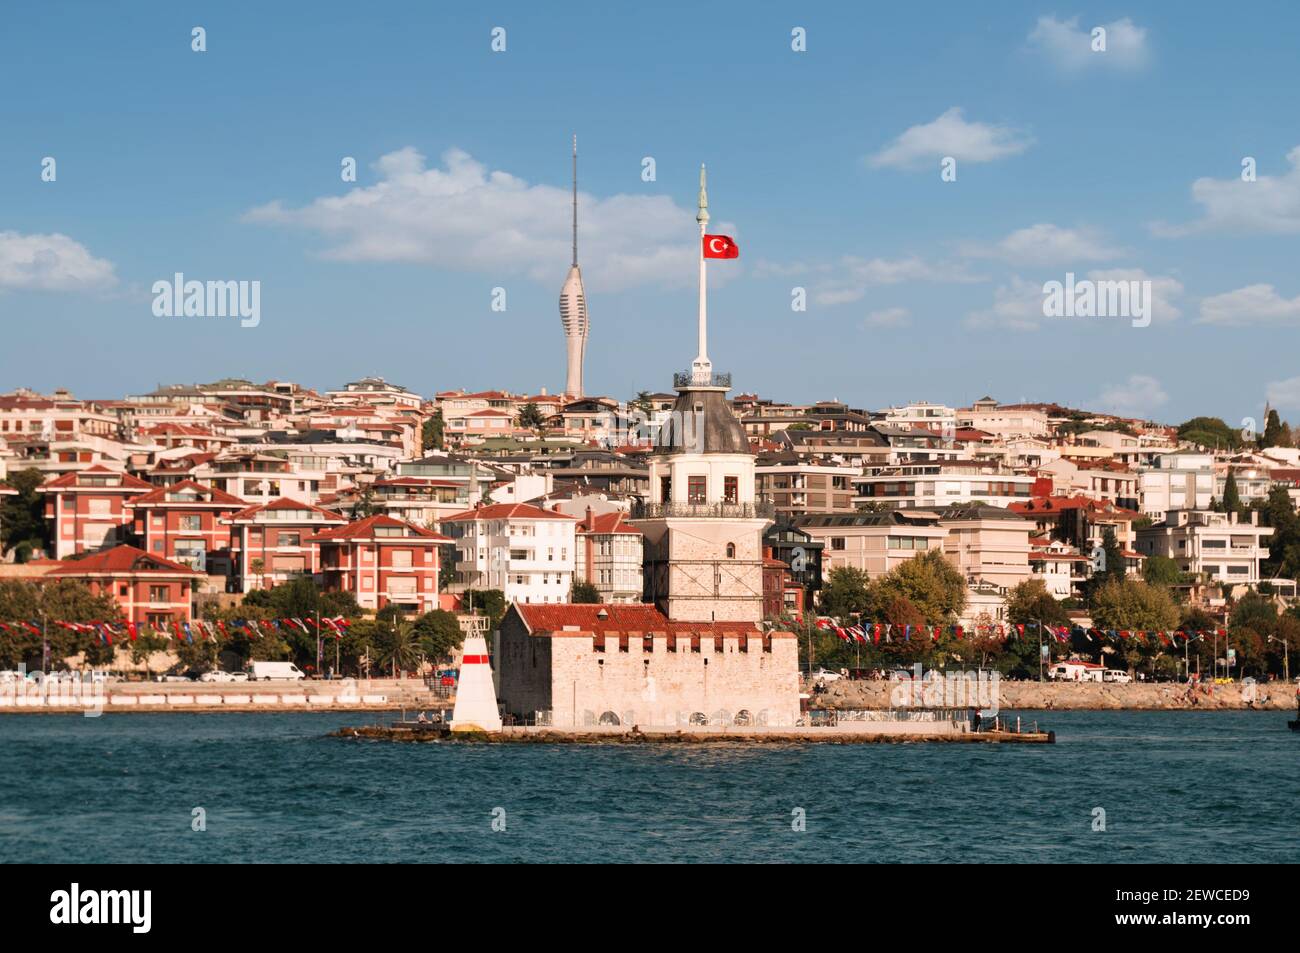 View from the waters of Bosporus Strait on residential blocks of Uskudar neighborhood with legendary Maiden's Tower spire competing with Istanbul TV Stock Photo